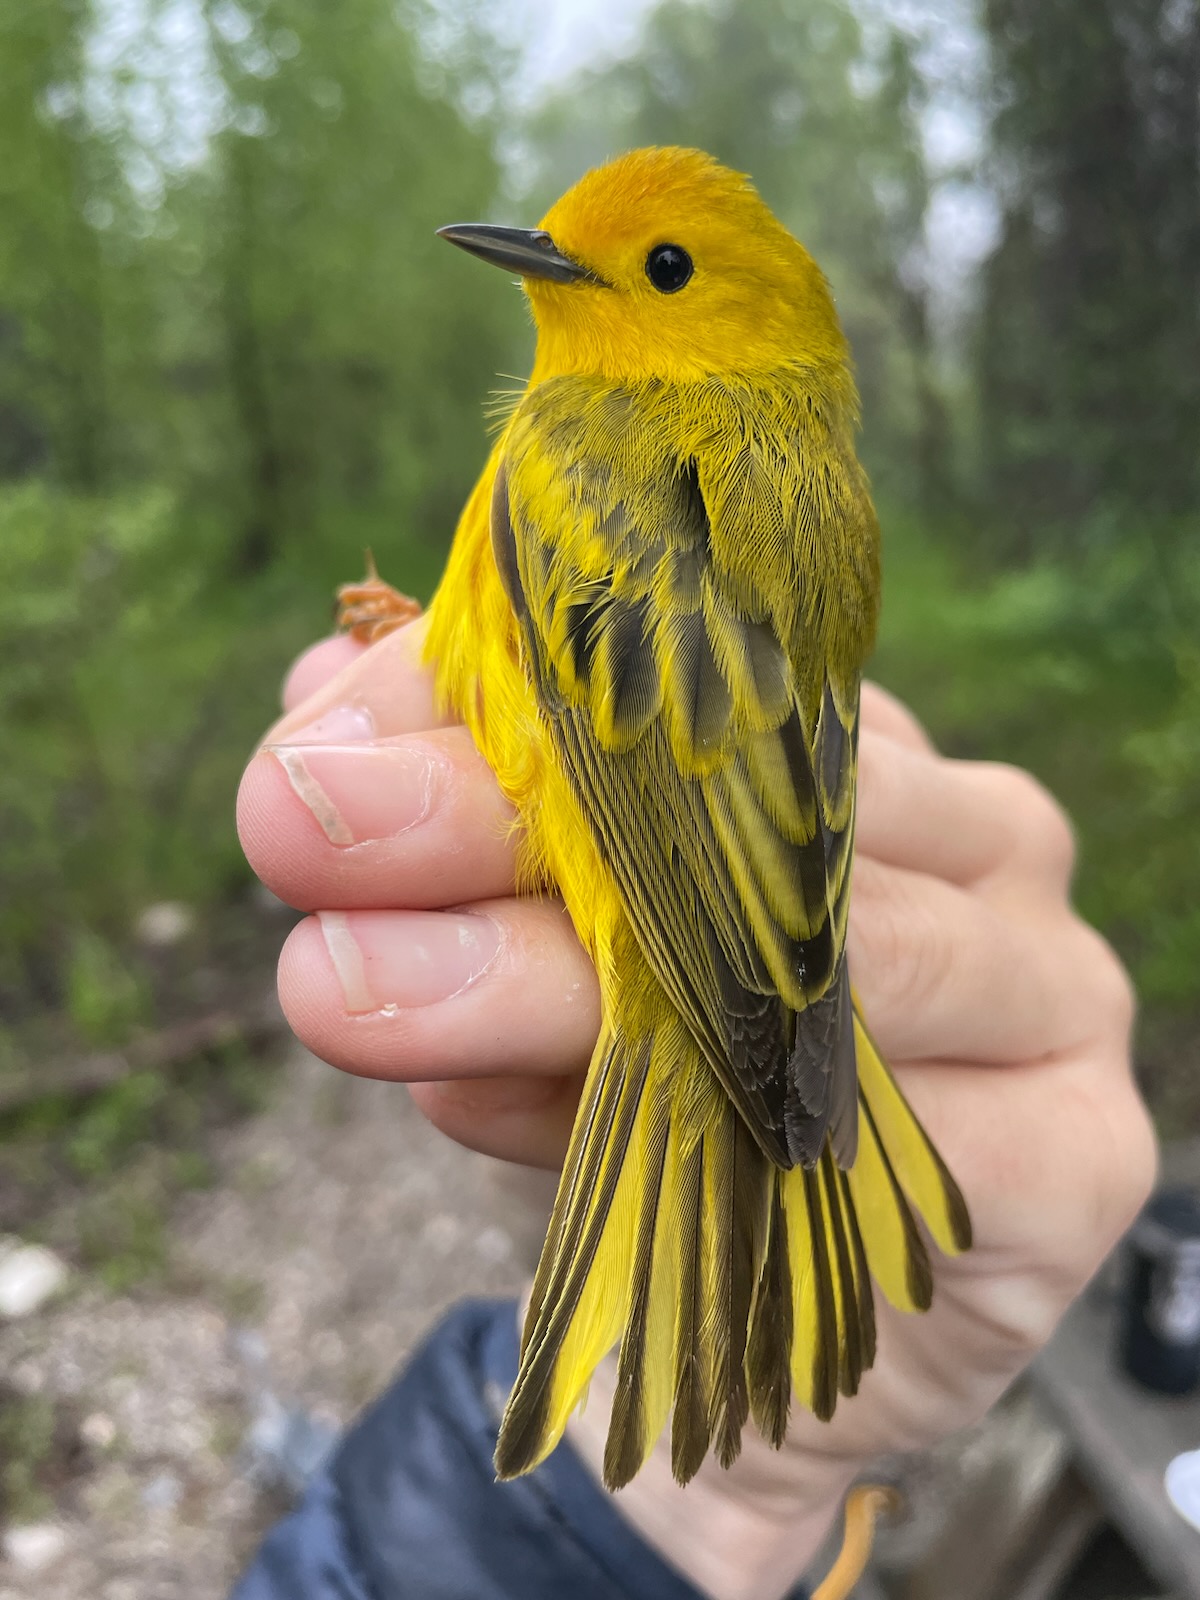 A yellow warbler. These birds were captured by scientists as part of the bird banding program.